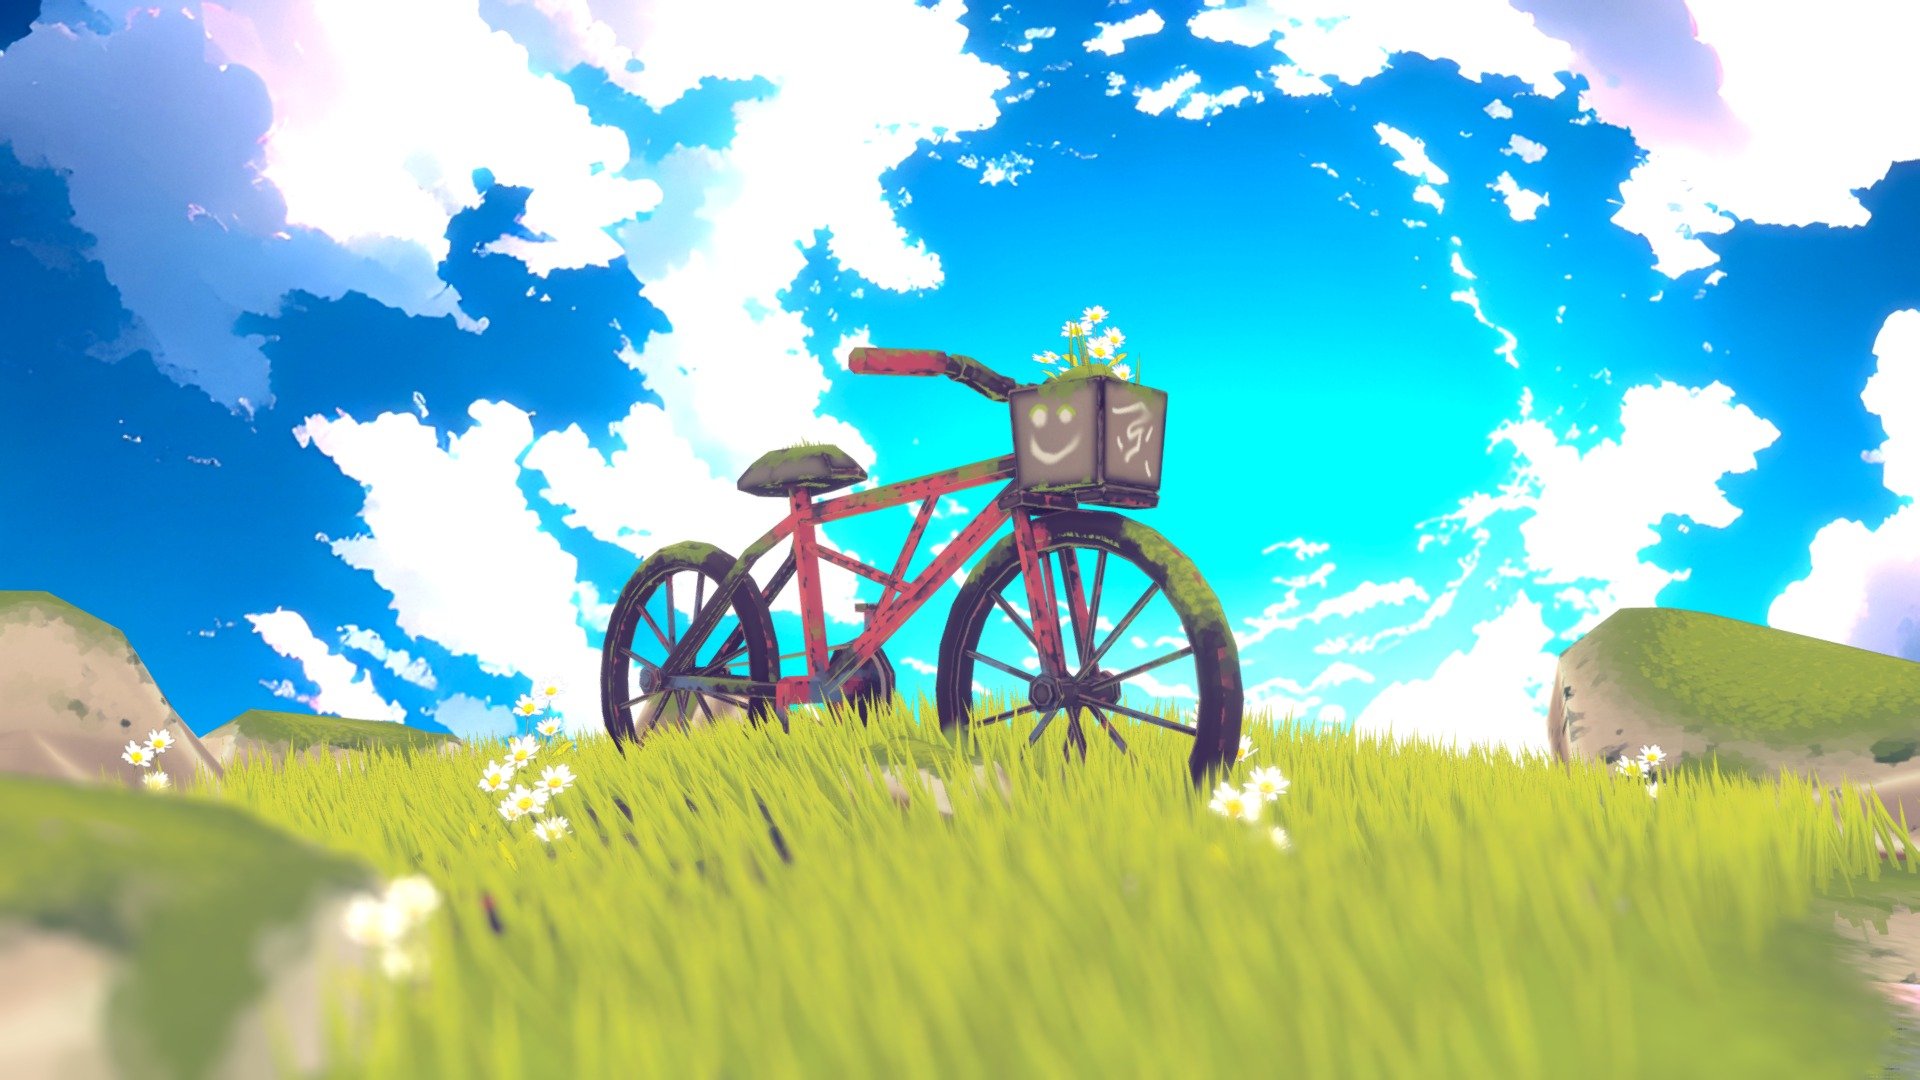 Lost bicycle in the meadow is a 3D model that depicts a scene of a bicycle that has been left behind in a tranquil meadow. The model is designed to create a sense of nostalgia and abandonment, with the rusty bicycle surrounded by tall grass and wildflowers, as if it has been lost and forgotten in time.

The bicycle itself is a prominent feature of the model, with its rusted metal frame and worn-down tires. The textures used for the grass, wildflowers, and dirt give the scene a natural and organic feel, while the lighting creates a warm and peaceful atmosphere.

this is my submission for #SketchfabWeeklyChallenge2023

Made with Blender, Substance painter &amp; Maya

Includes all are texures in 1K resolution

Contains




Substance painter texture project file

Blend file

FBX file

Texture files (including the 4 different skies)

Renders 

Please share your thoughts in comments, if you are buying the model please consider rating and writing the view on the model

Thank you! - Lost Bicycle in the meadow - low poly stylized - Buy Royalty Free 3D model by Karthik Naidu (@Karthiknaidu97) 3d model